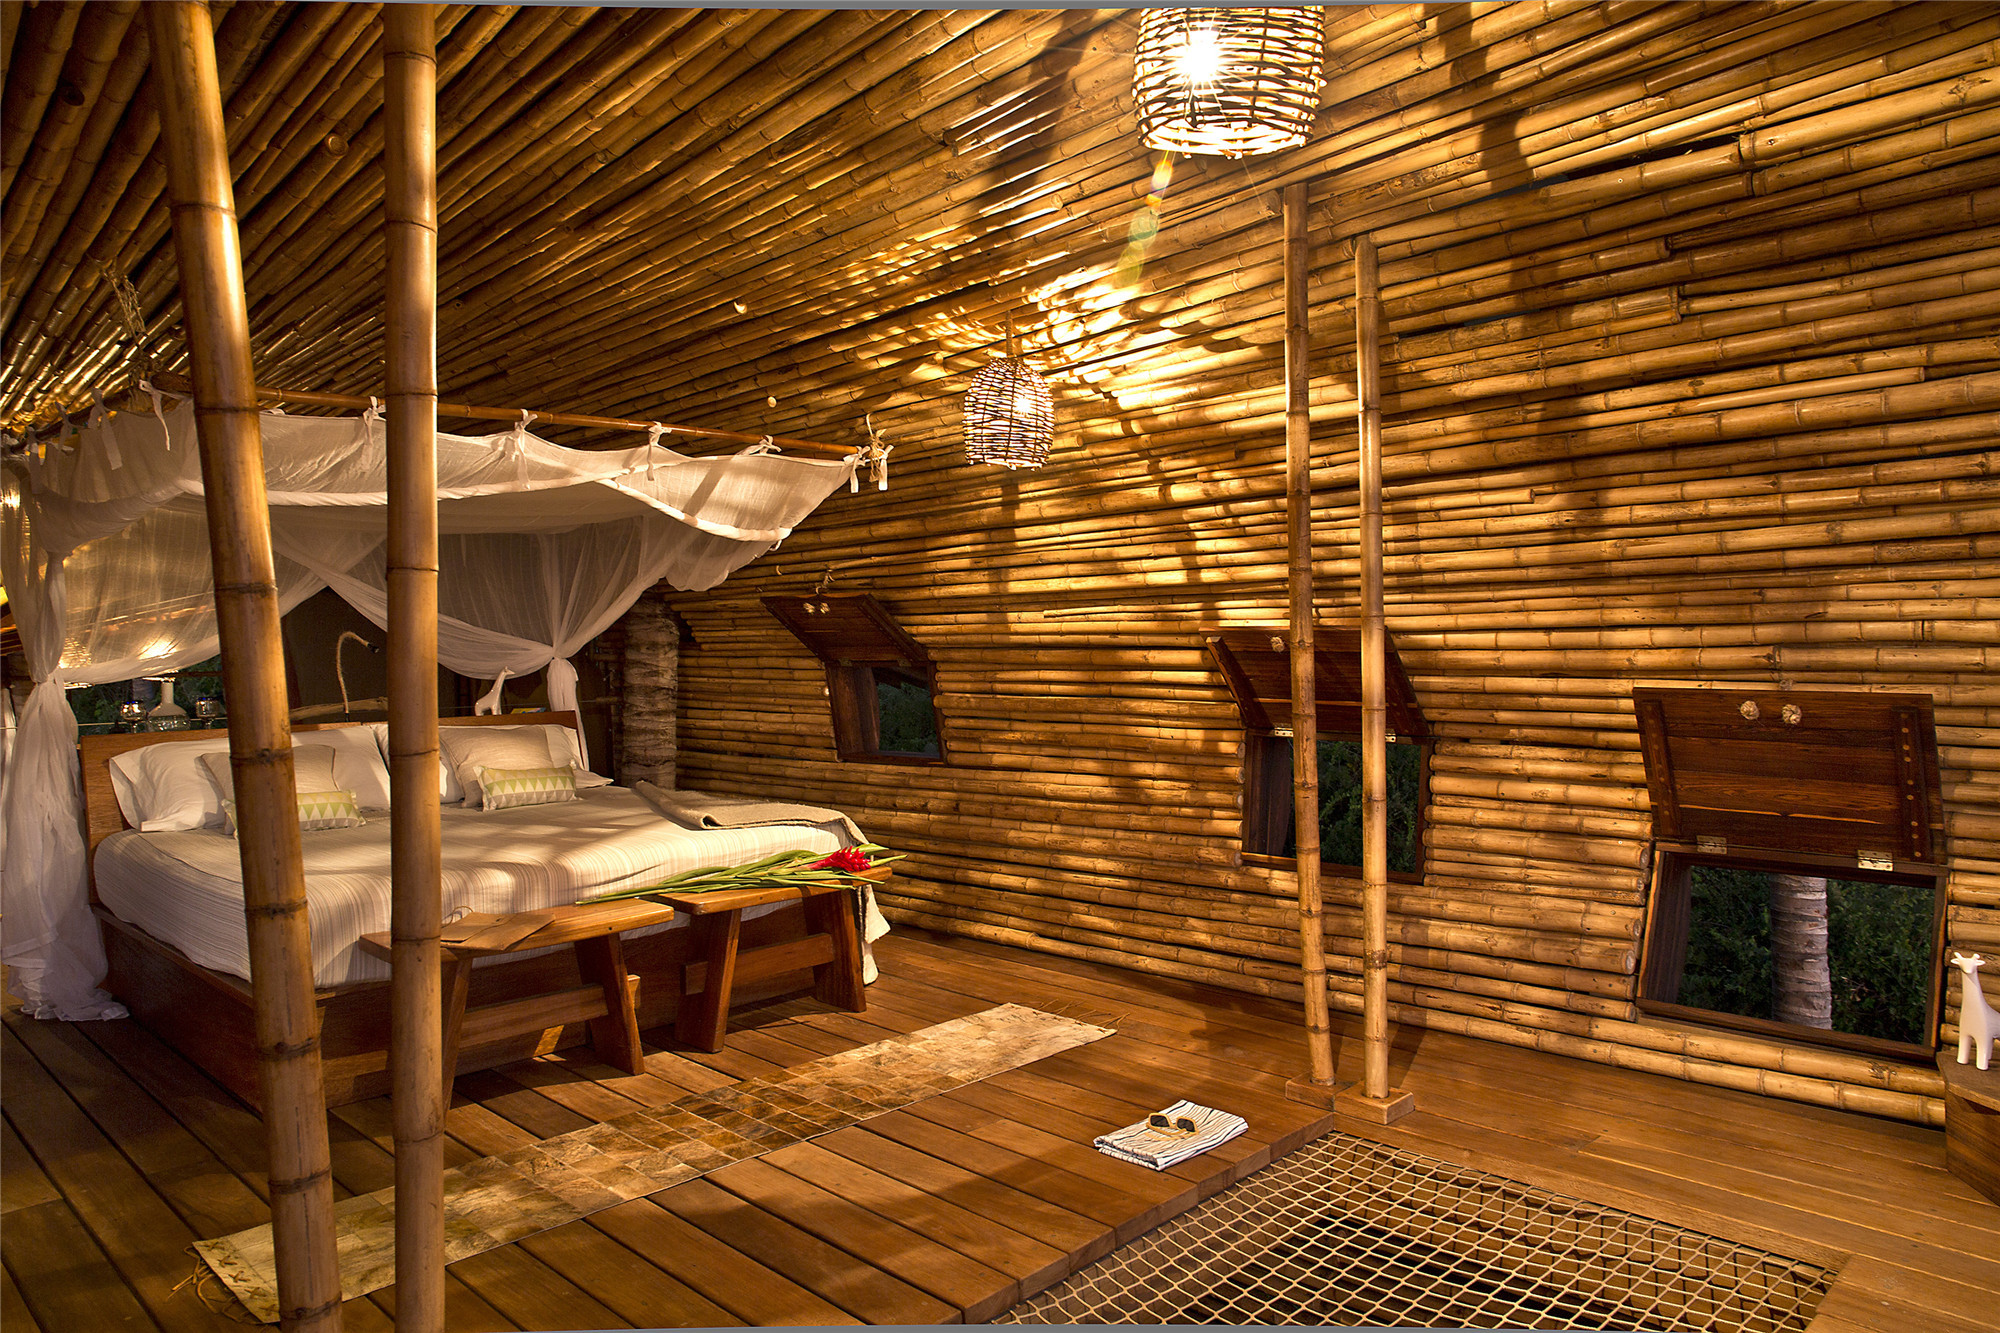 diy treehouse made from bamboo and wood, double bed with a baldachin, several lit lamps, three windows with open shutters